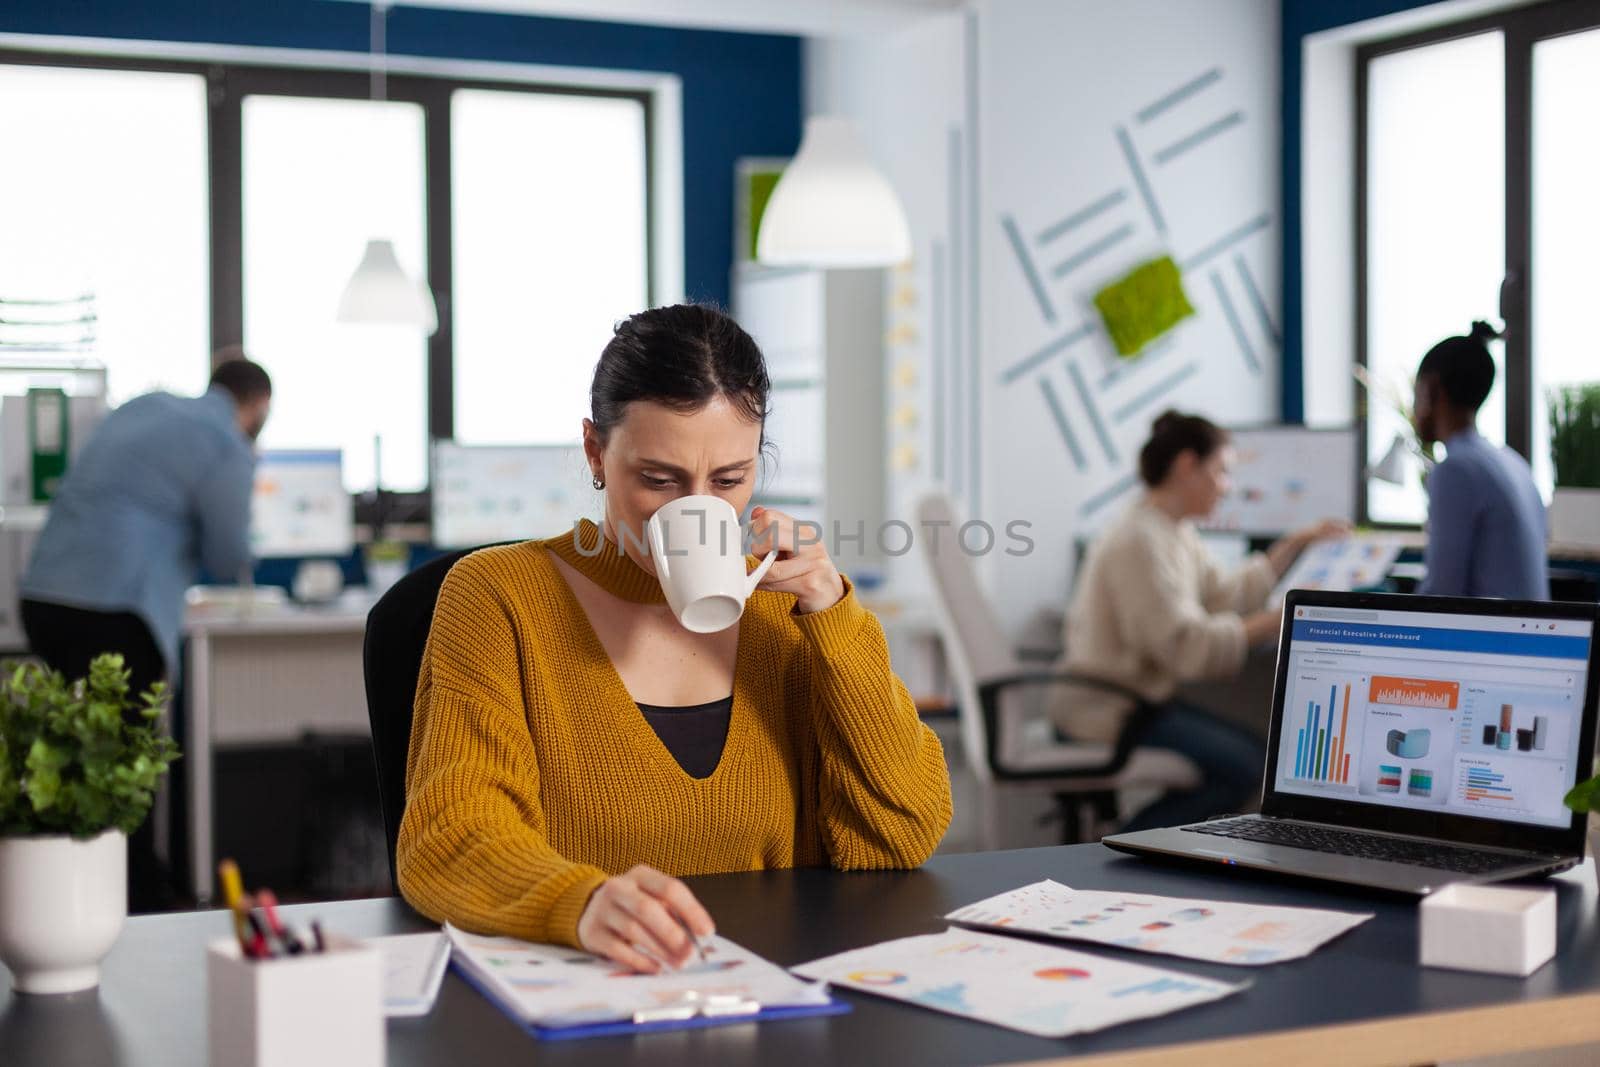 Brand manager businesswoman drinking a cup of coffee analysing financial start up charts. Executive entrepreneur, manager leader sitting working on projects with diverse teamworkers.